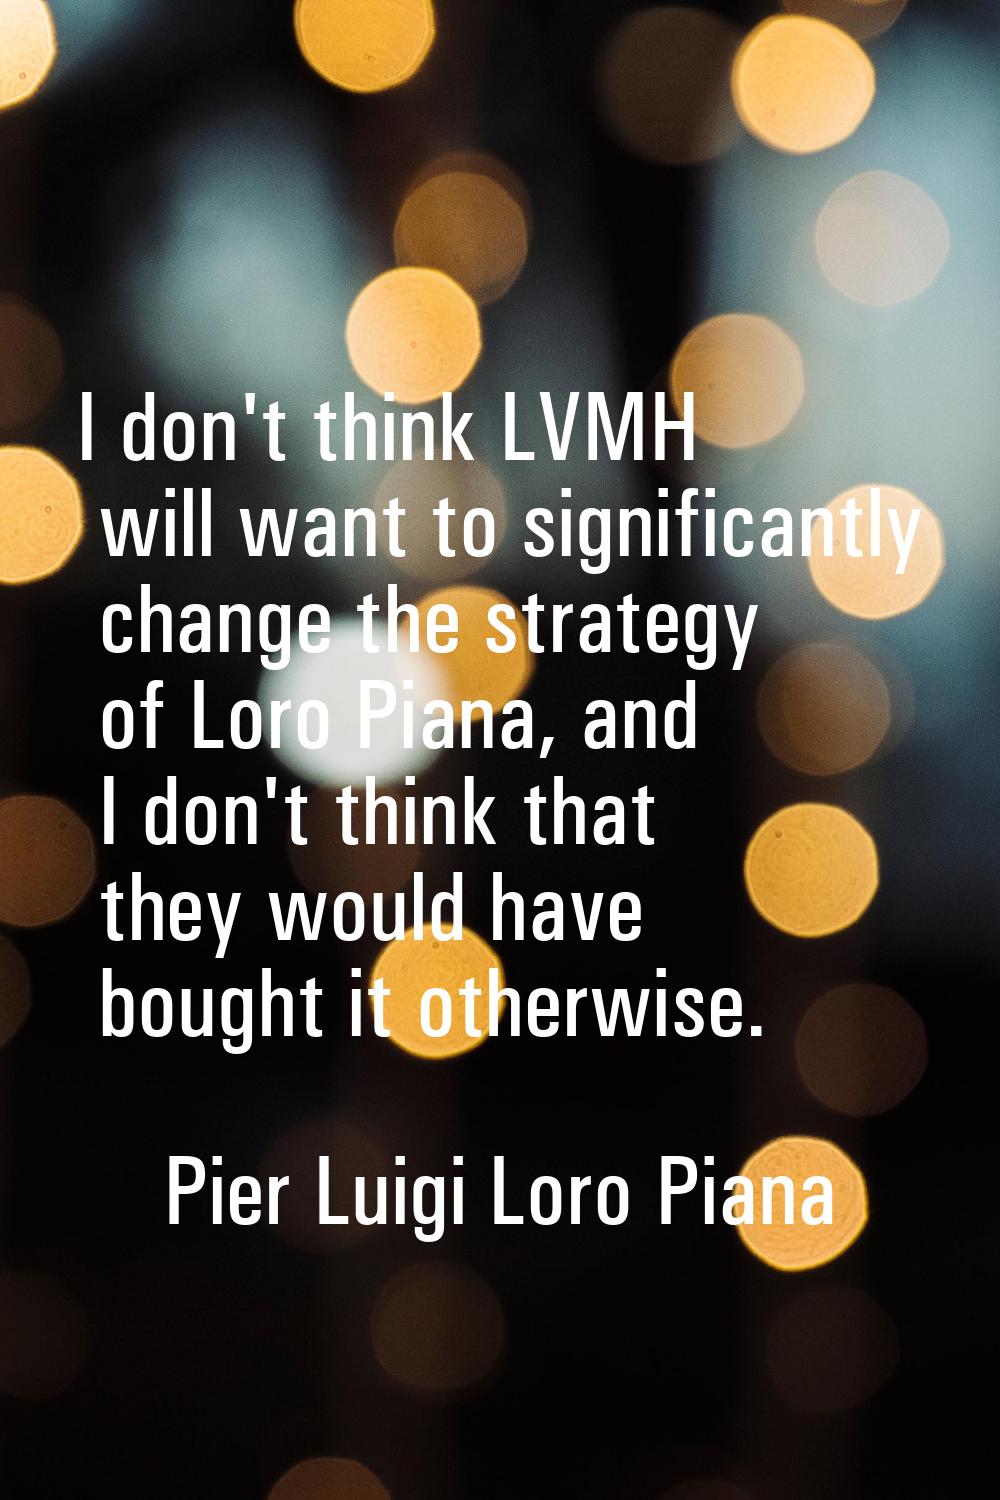 I don't think LVMH will want to significantly change the strategy of Loro Piana, and I don't think 